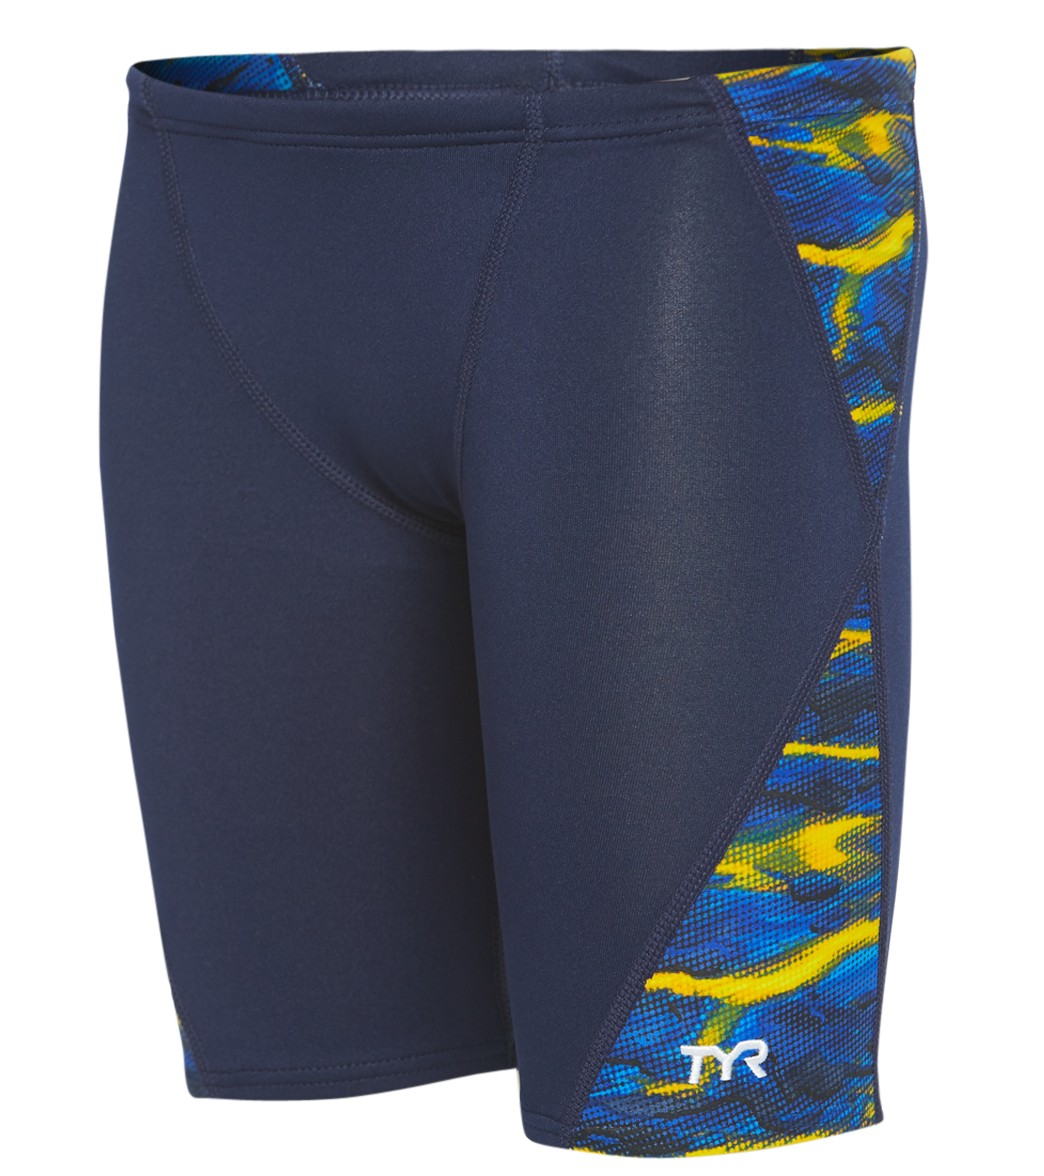 TYR Boys' Lambent Blade Jammer Swimsuit - Navy/Gold 22 Polyester/Spandex - Swimoutlet.com